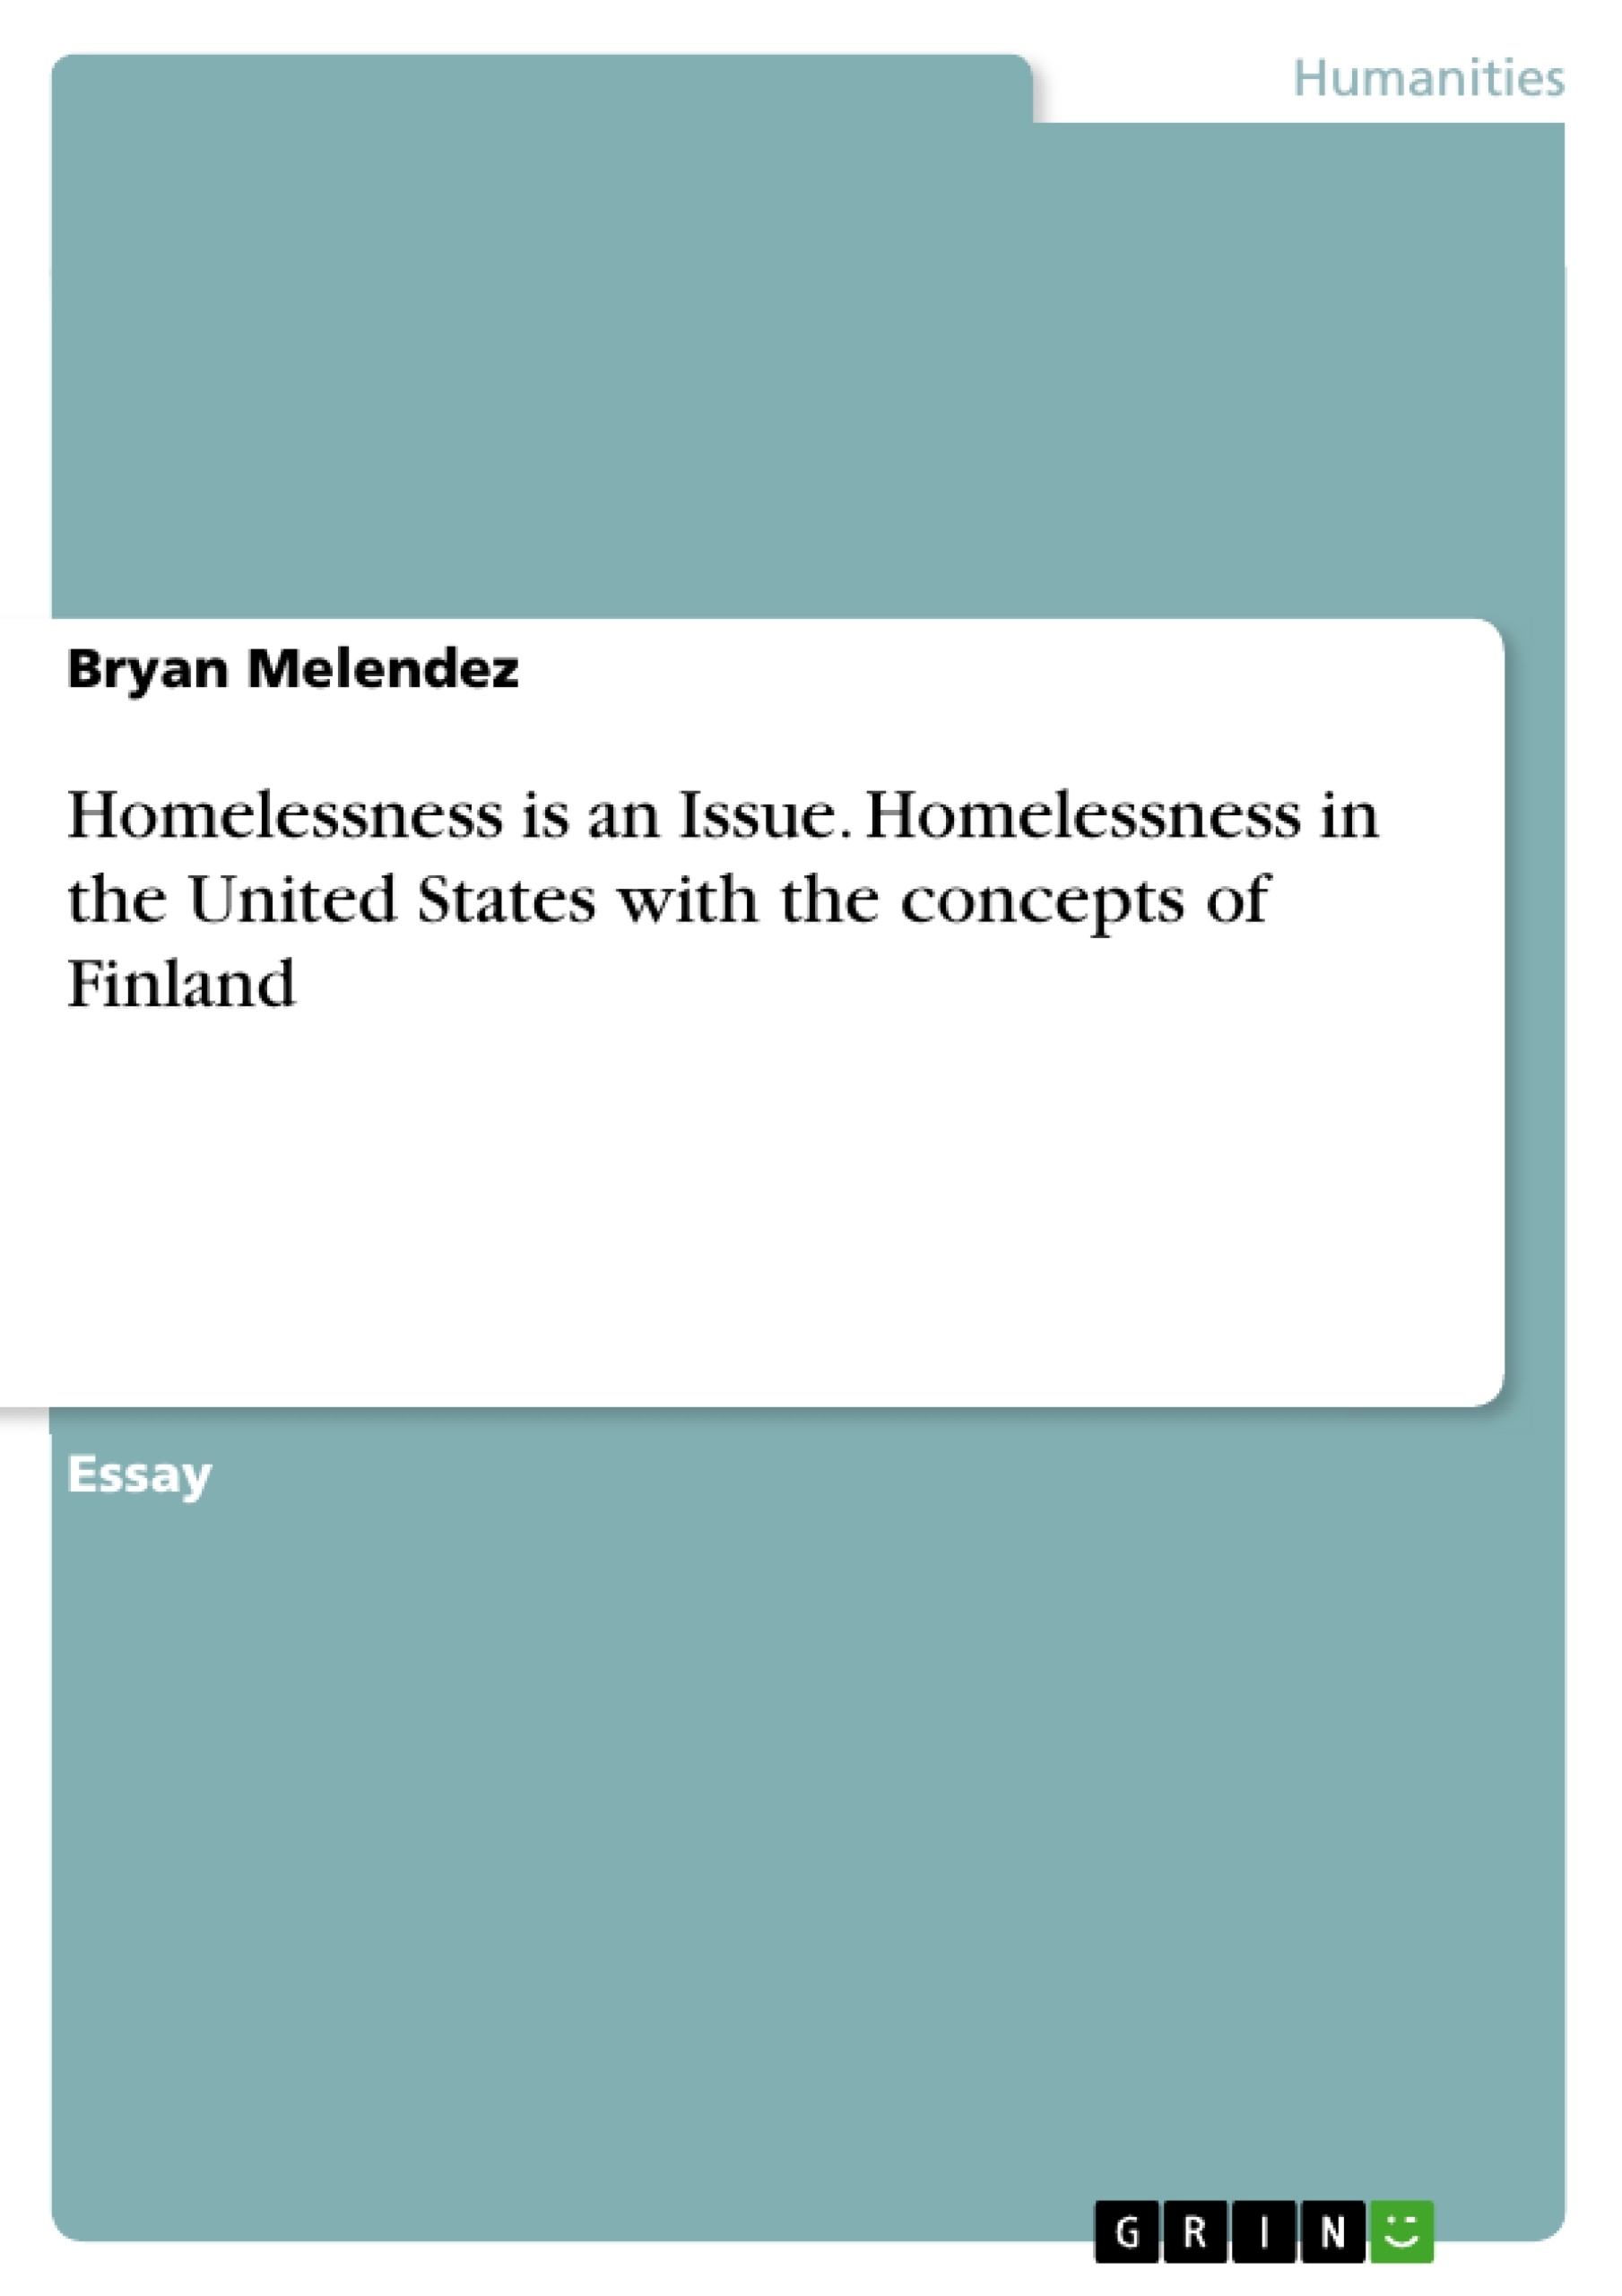 Title: Homelessness is an Issue. Homelessness in the United States with the concepts of Finland